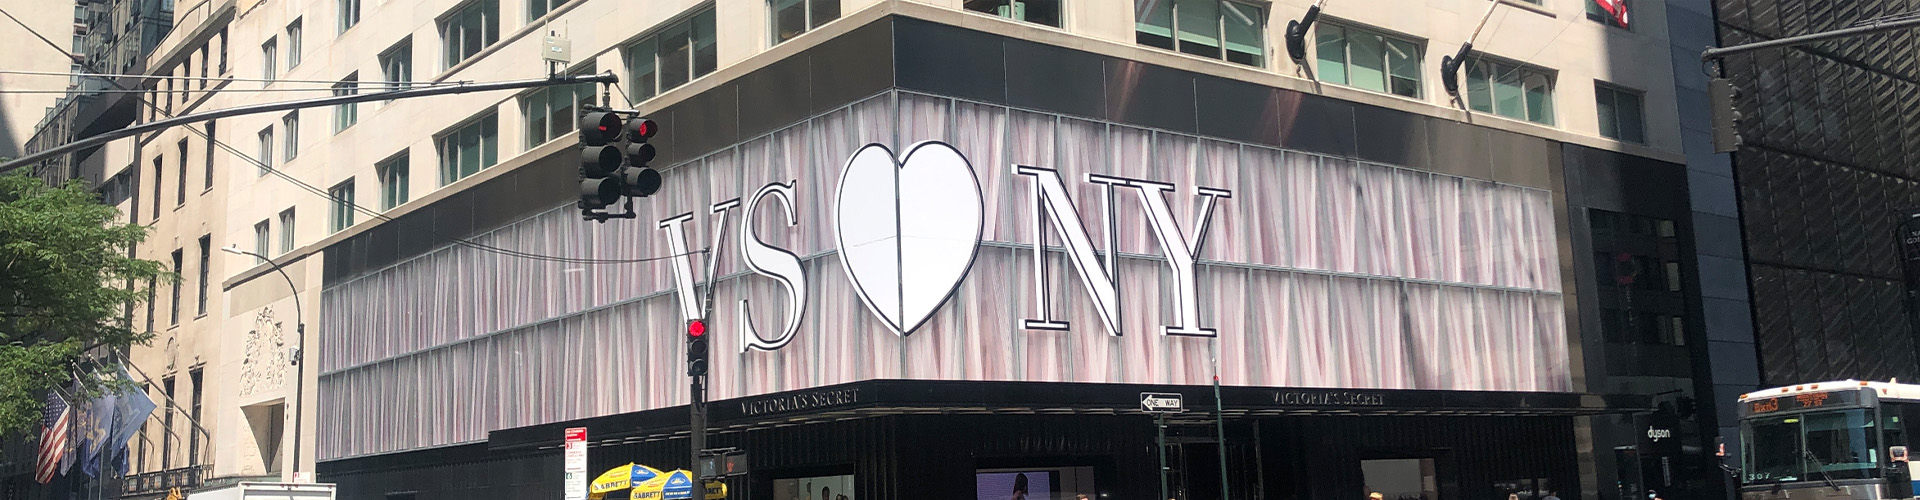 Victoria’s Secret: From Aspirational to Inclusive Report Banner featuring storefront of Victorias Secret New York Flagship